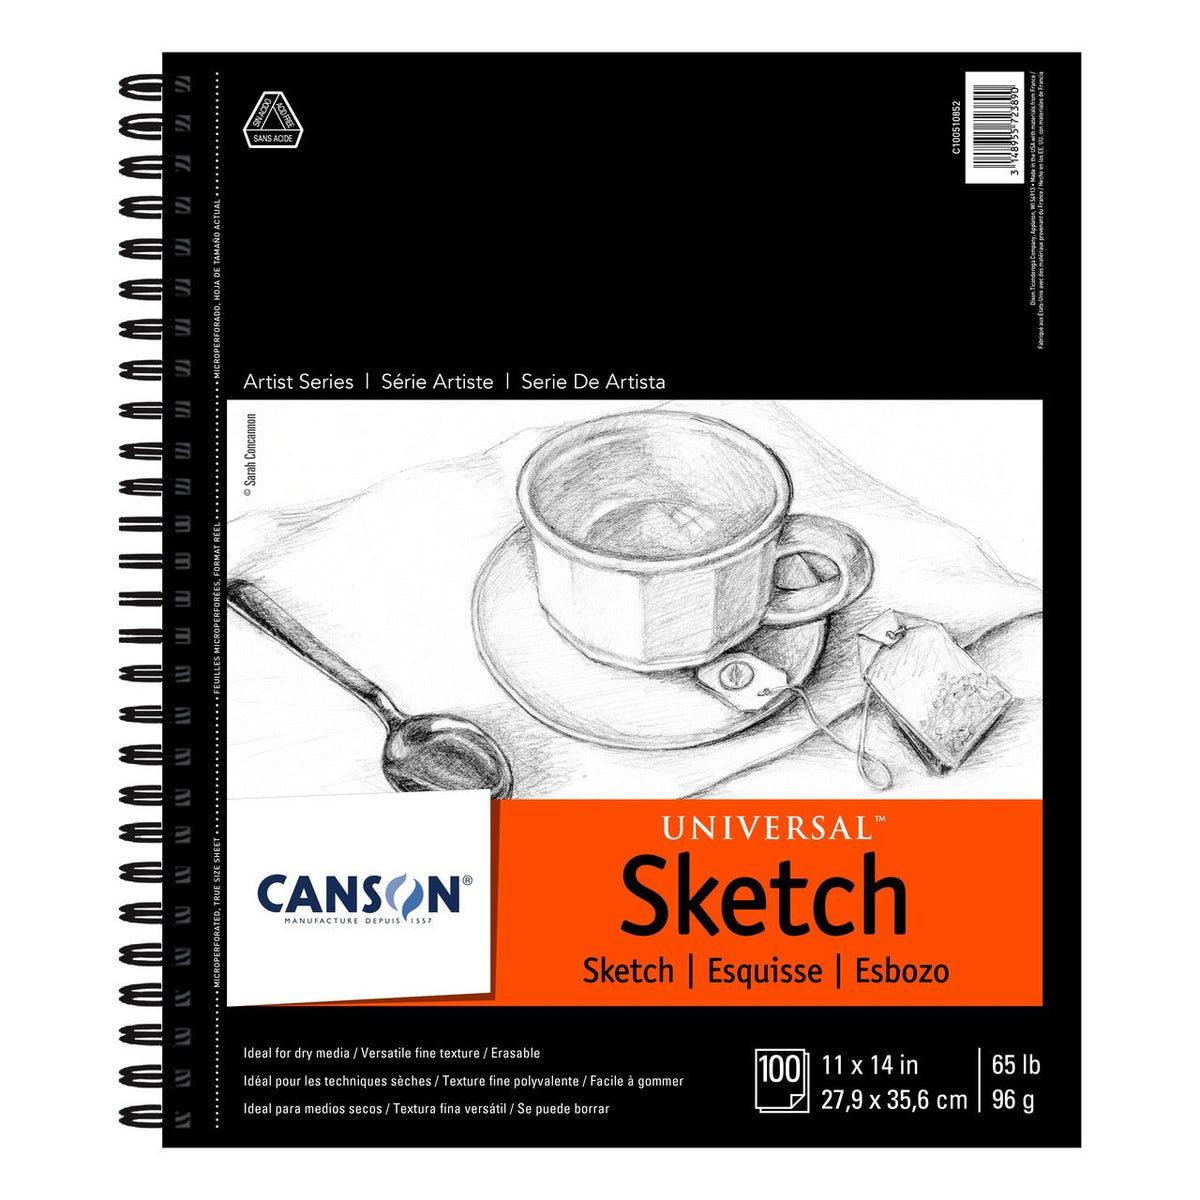  Strathmore 400 Series Sketch Pad, 9x12 inch, 100